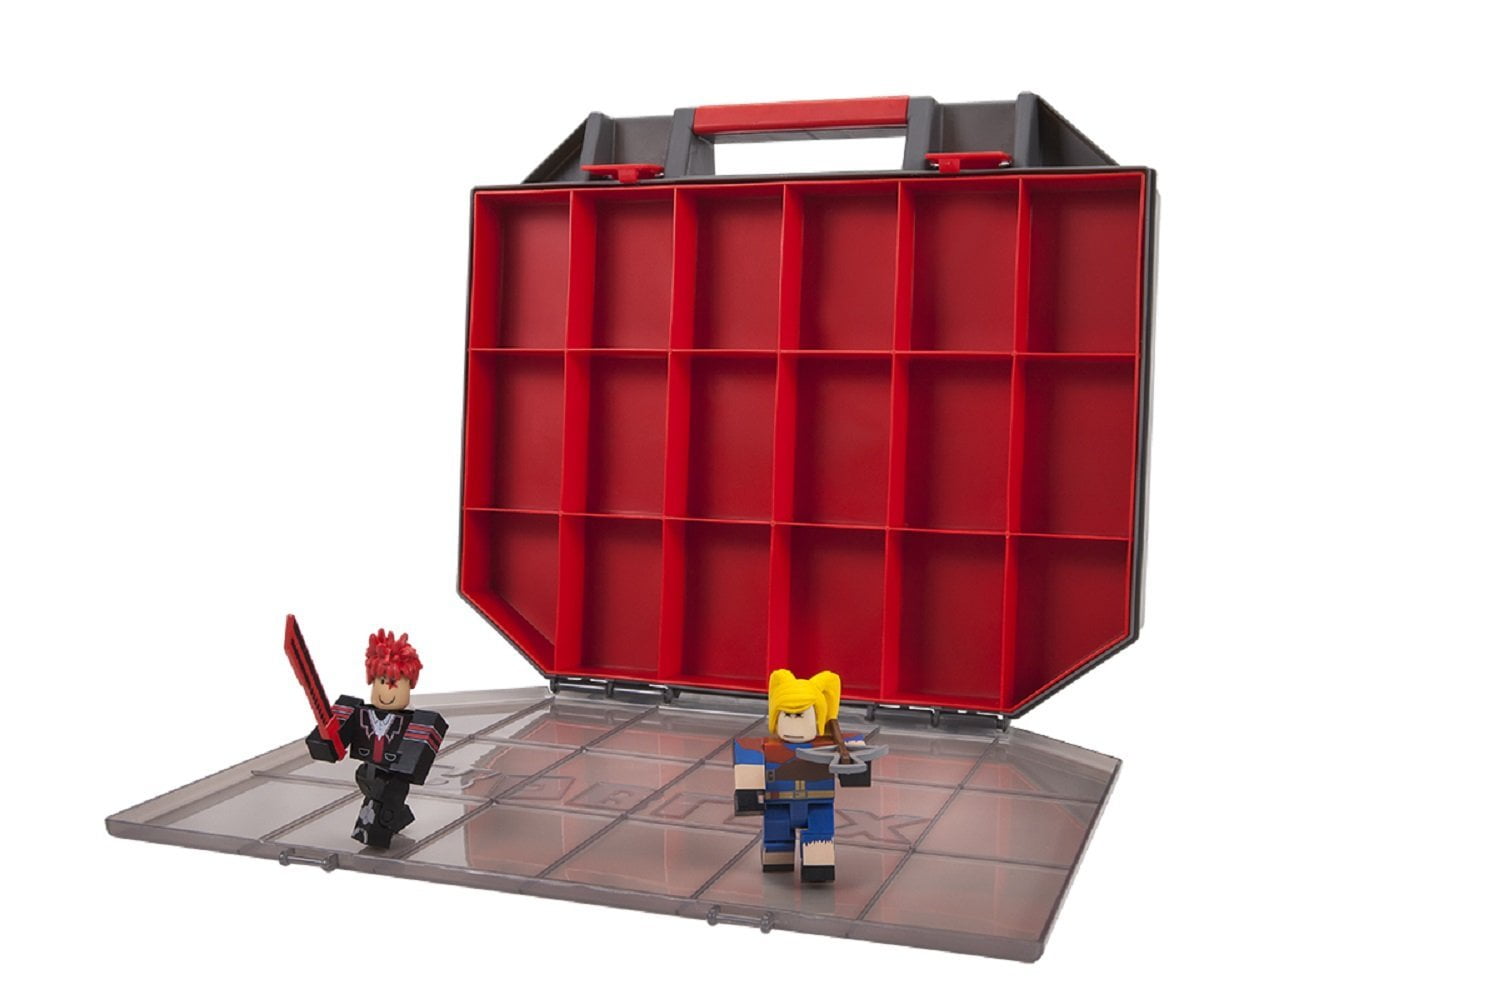 Collector S Tool Box The Collector S Tool Boxwalmartes With Two Characters Red Lazer Parkour Runner And The Giant Hunter By Roblox Walmart Com Walmart Com - roblox collectors tool box walmart com